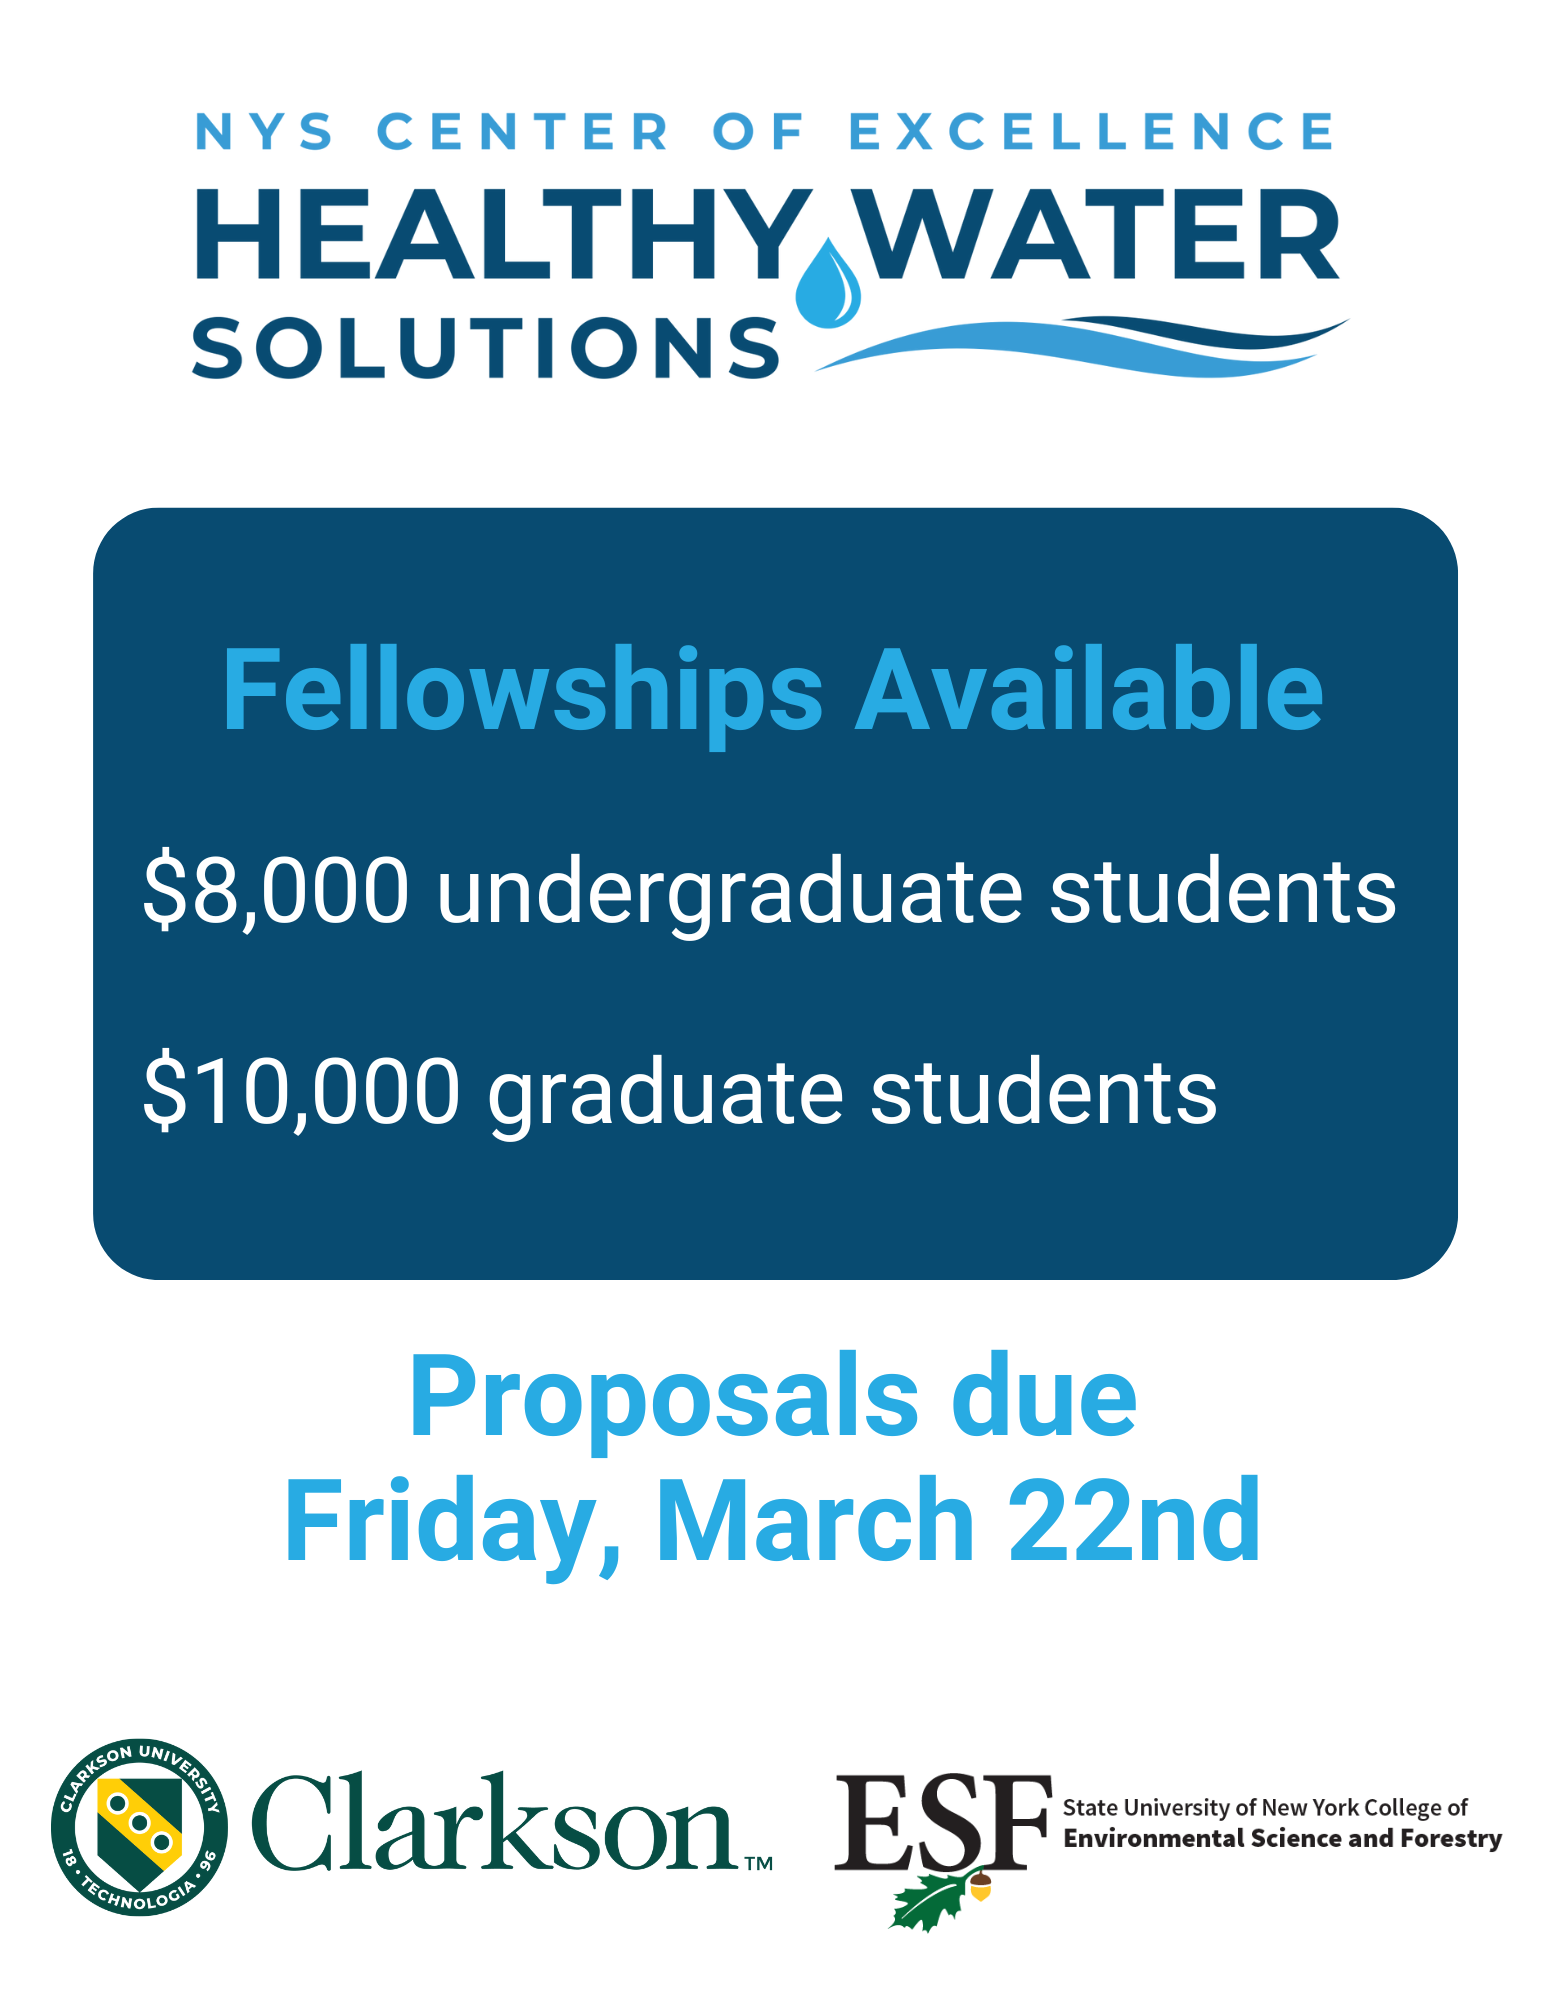 Fellowships Available for Undergrad and Grad Students through NYS CoE in Healthy Water Solutions